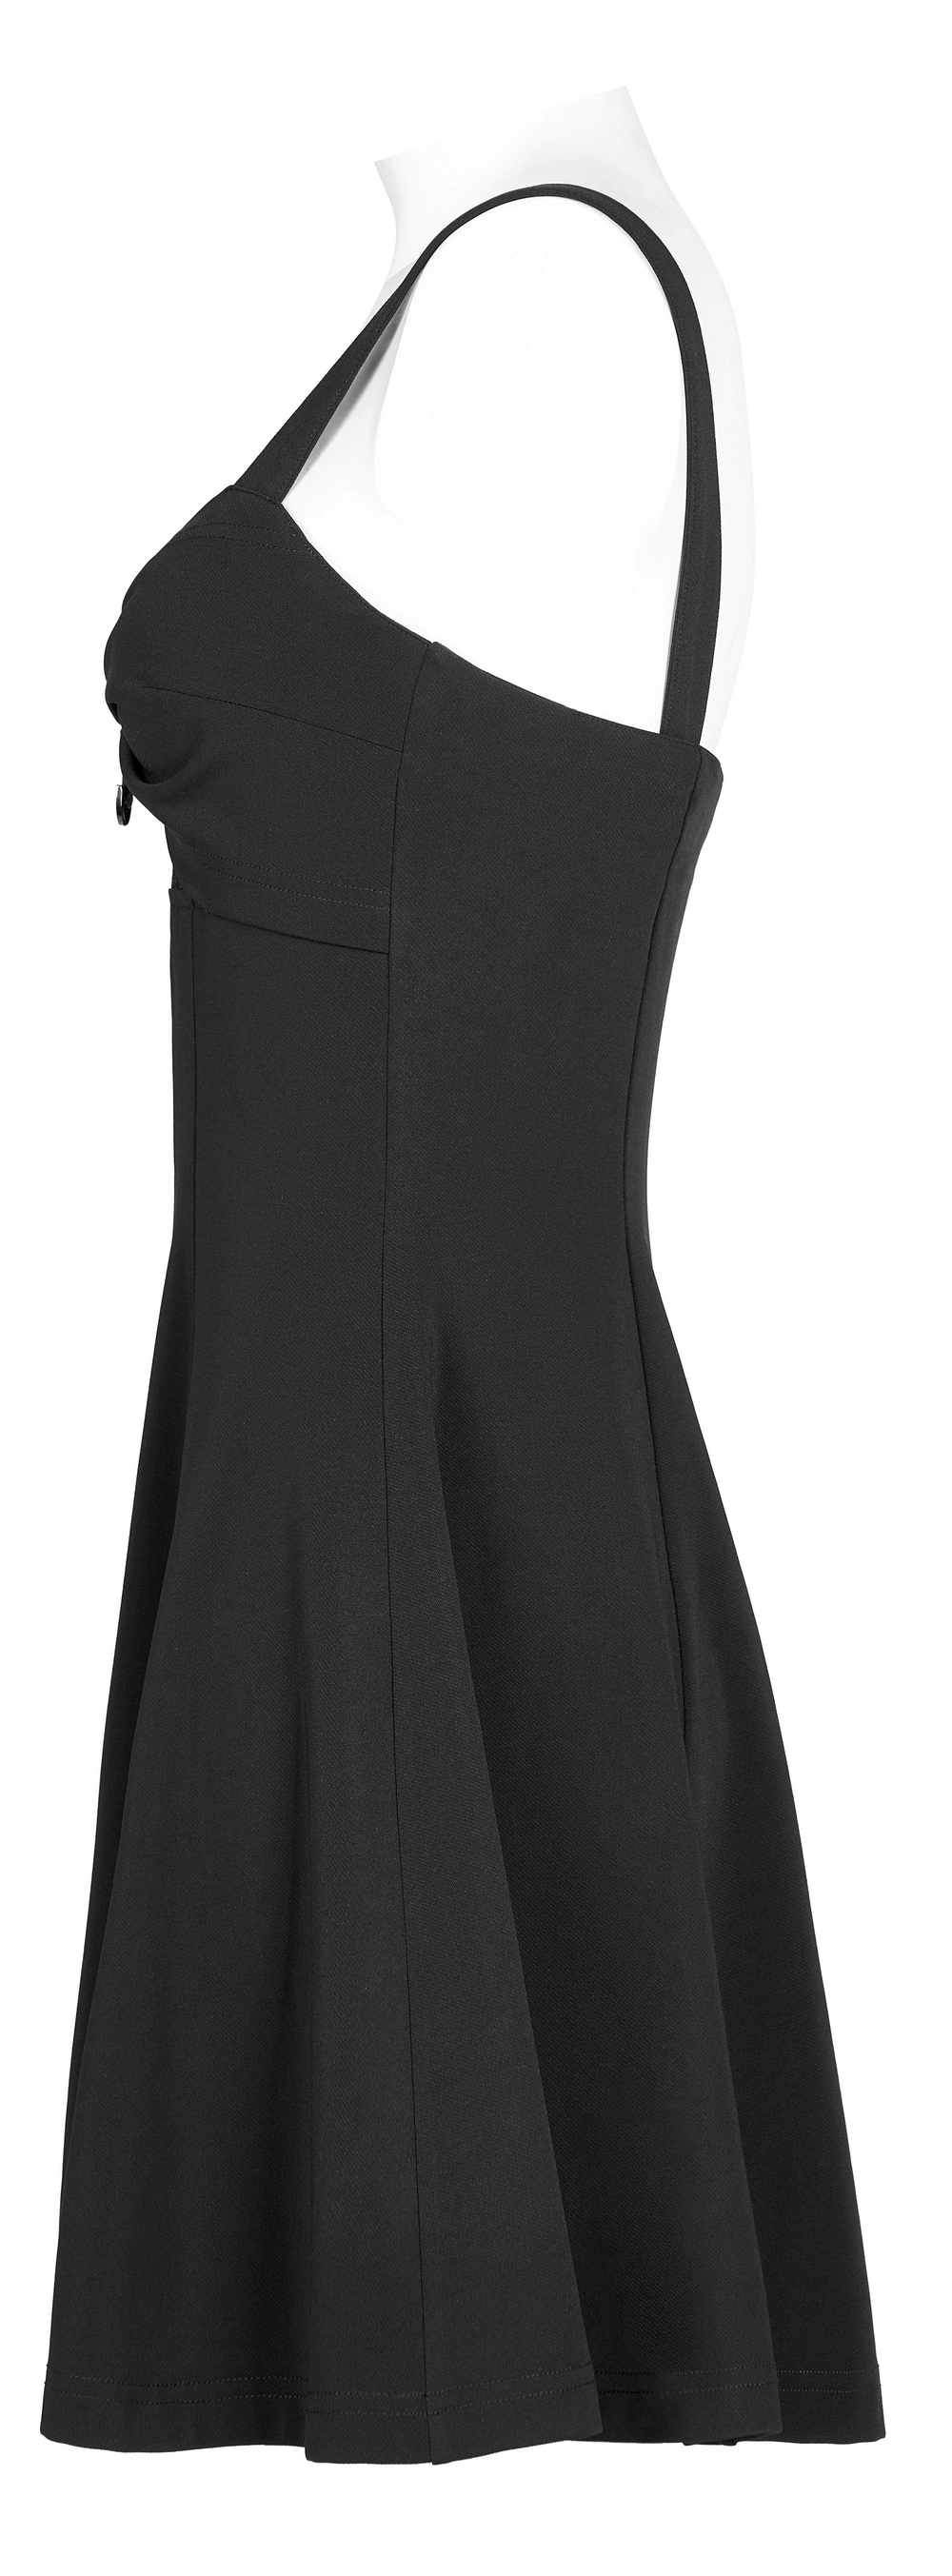 Sleek A-Line Skater Dress with Mesh and Metal Detail